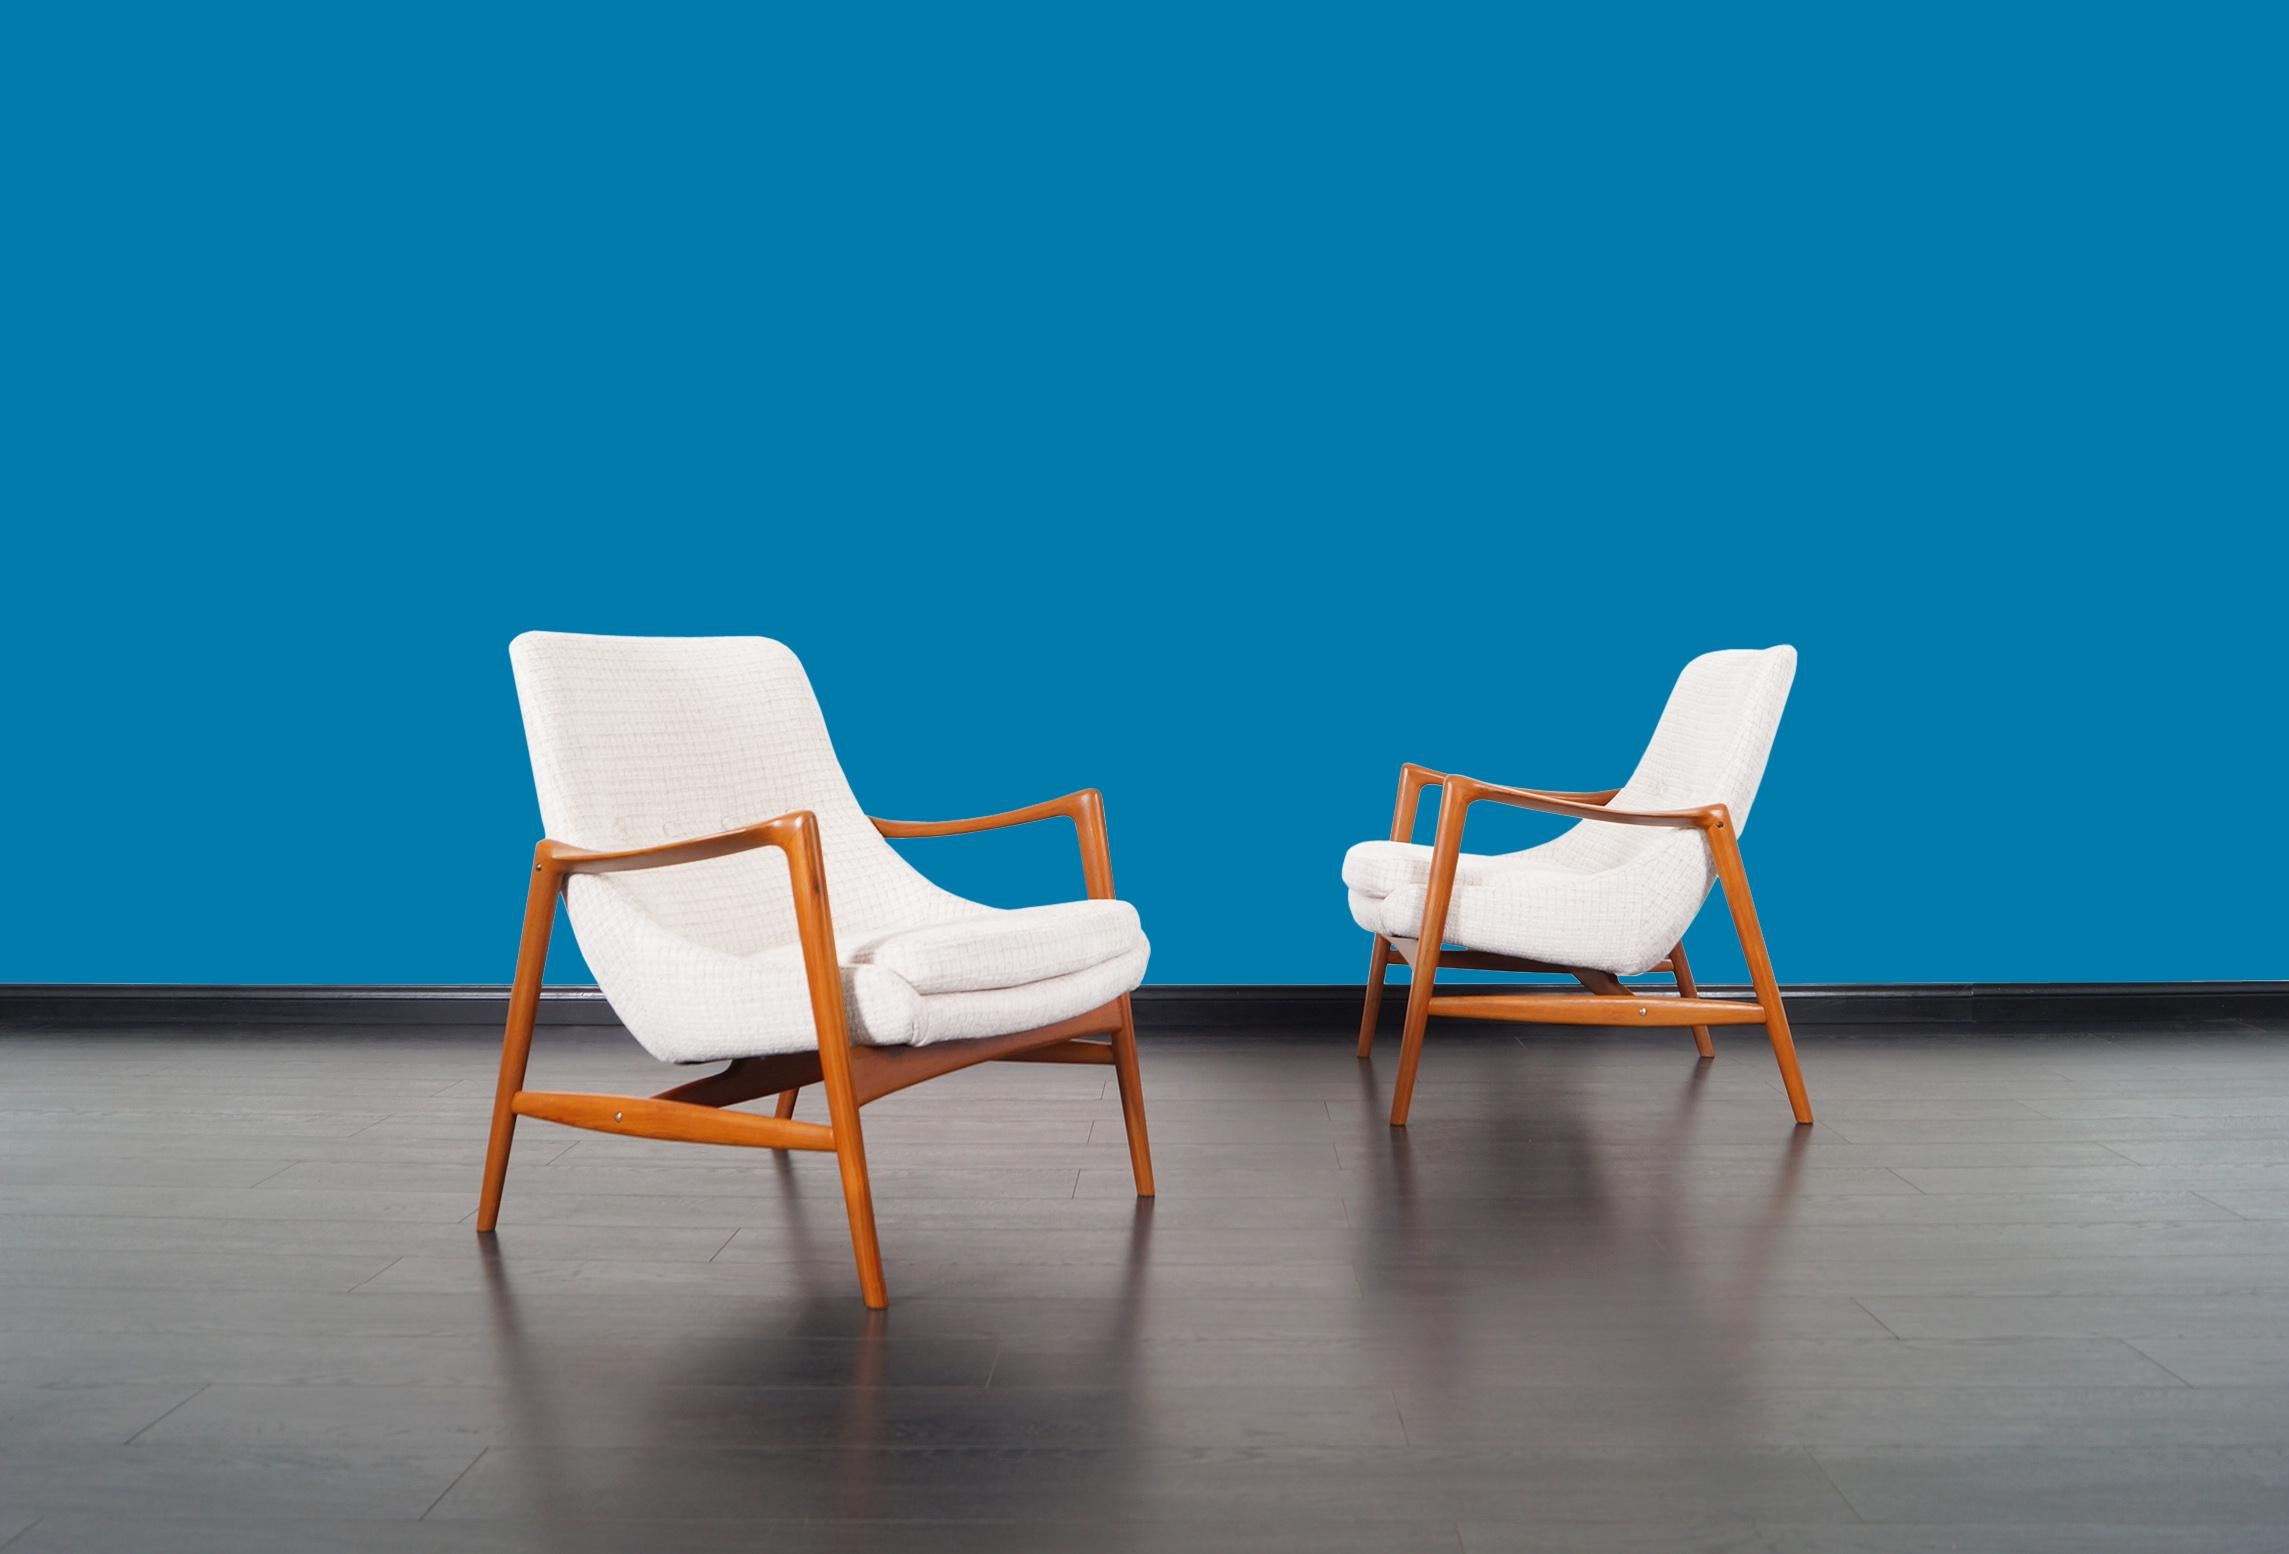 Pair of stunning Norwegian teak lounge chairs designed by Rolf Rastad and Adolf Relling for Bokka Møbler. Features solid teak frames and professionally reupholstered in custom chenille fabric.